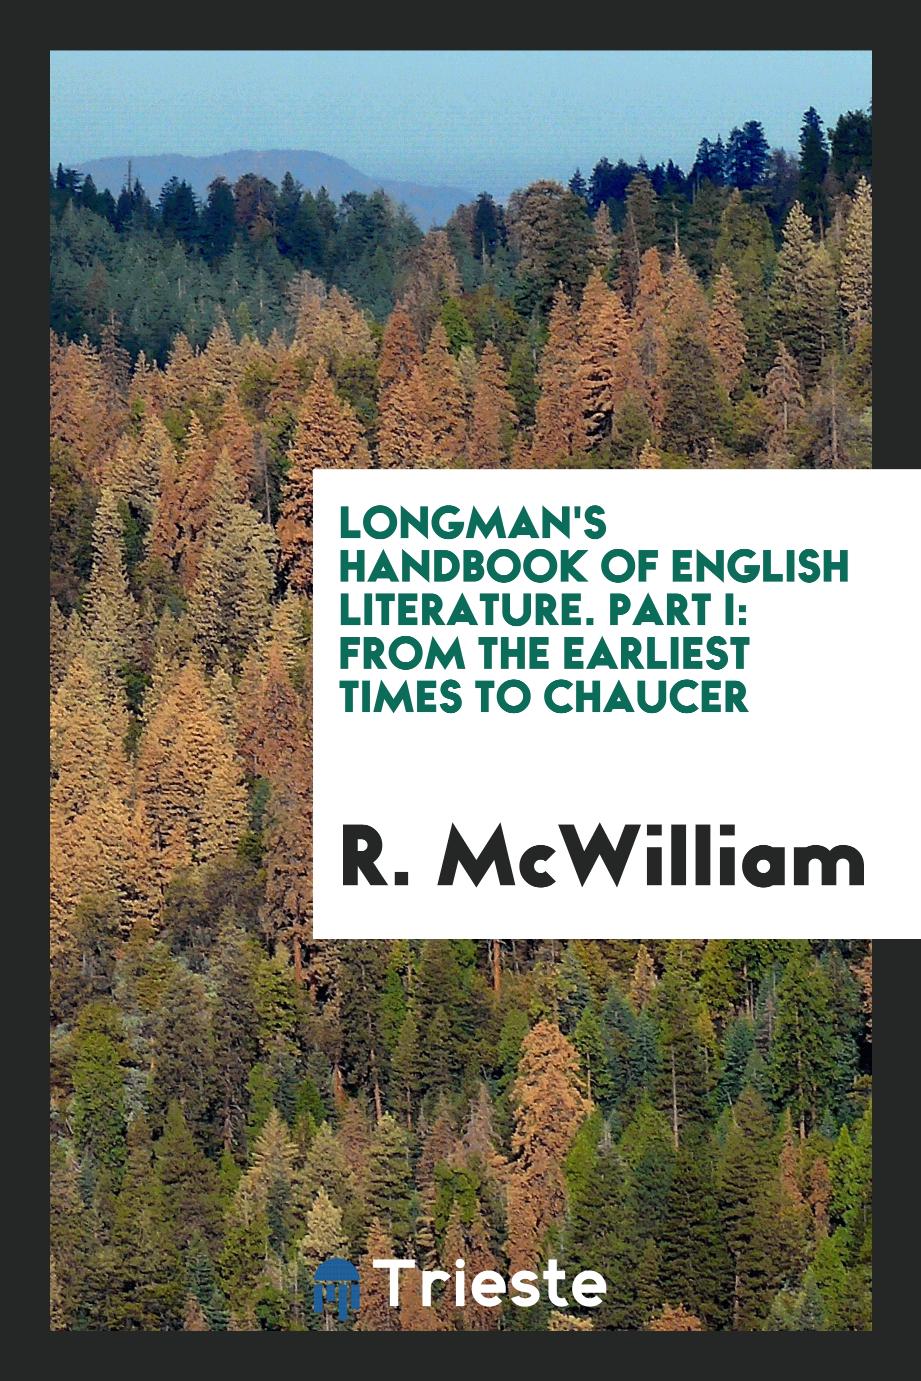 Longman's Handbook of English Literature. Part I: From the Earliest Times to Chaucer